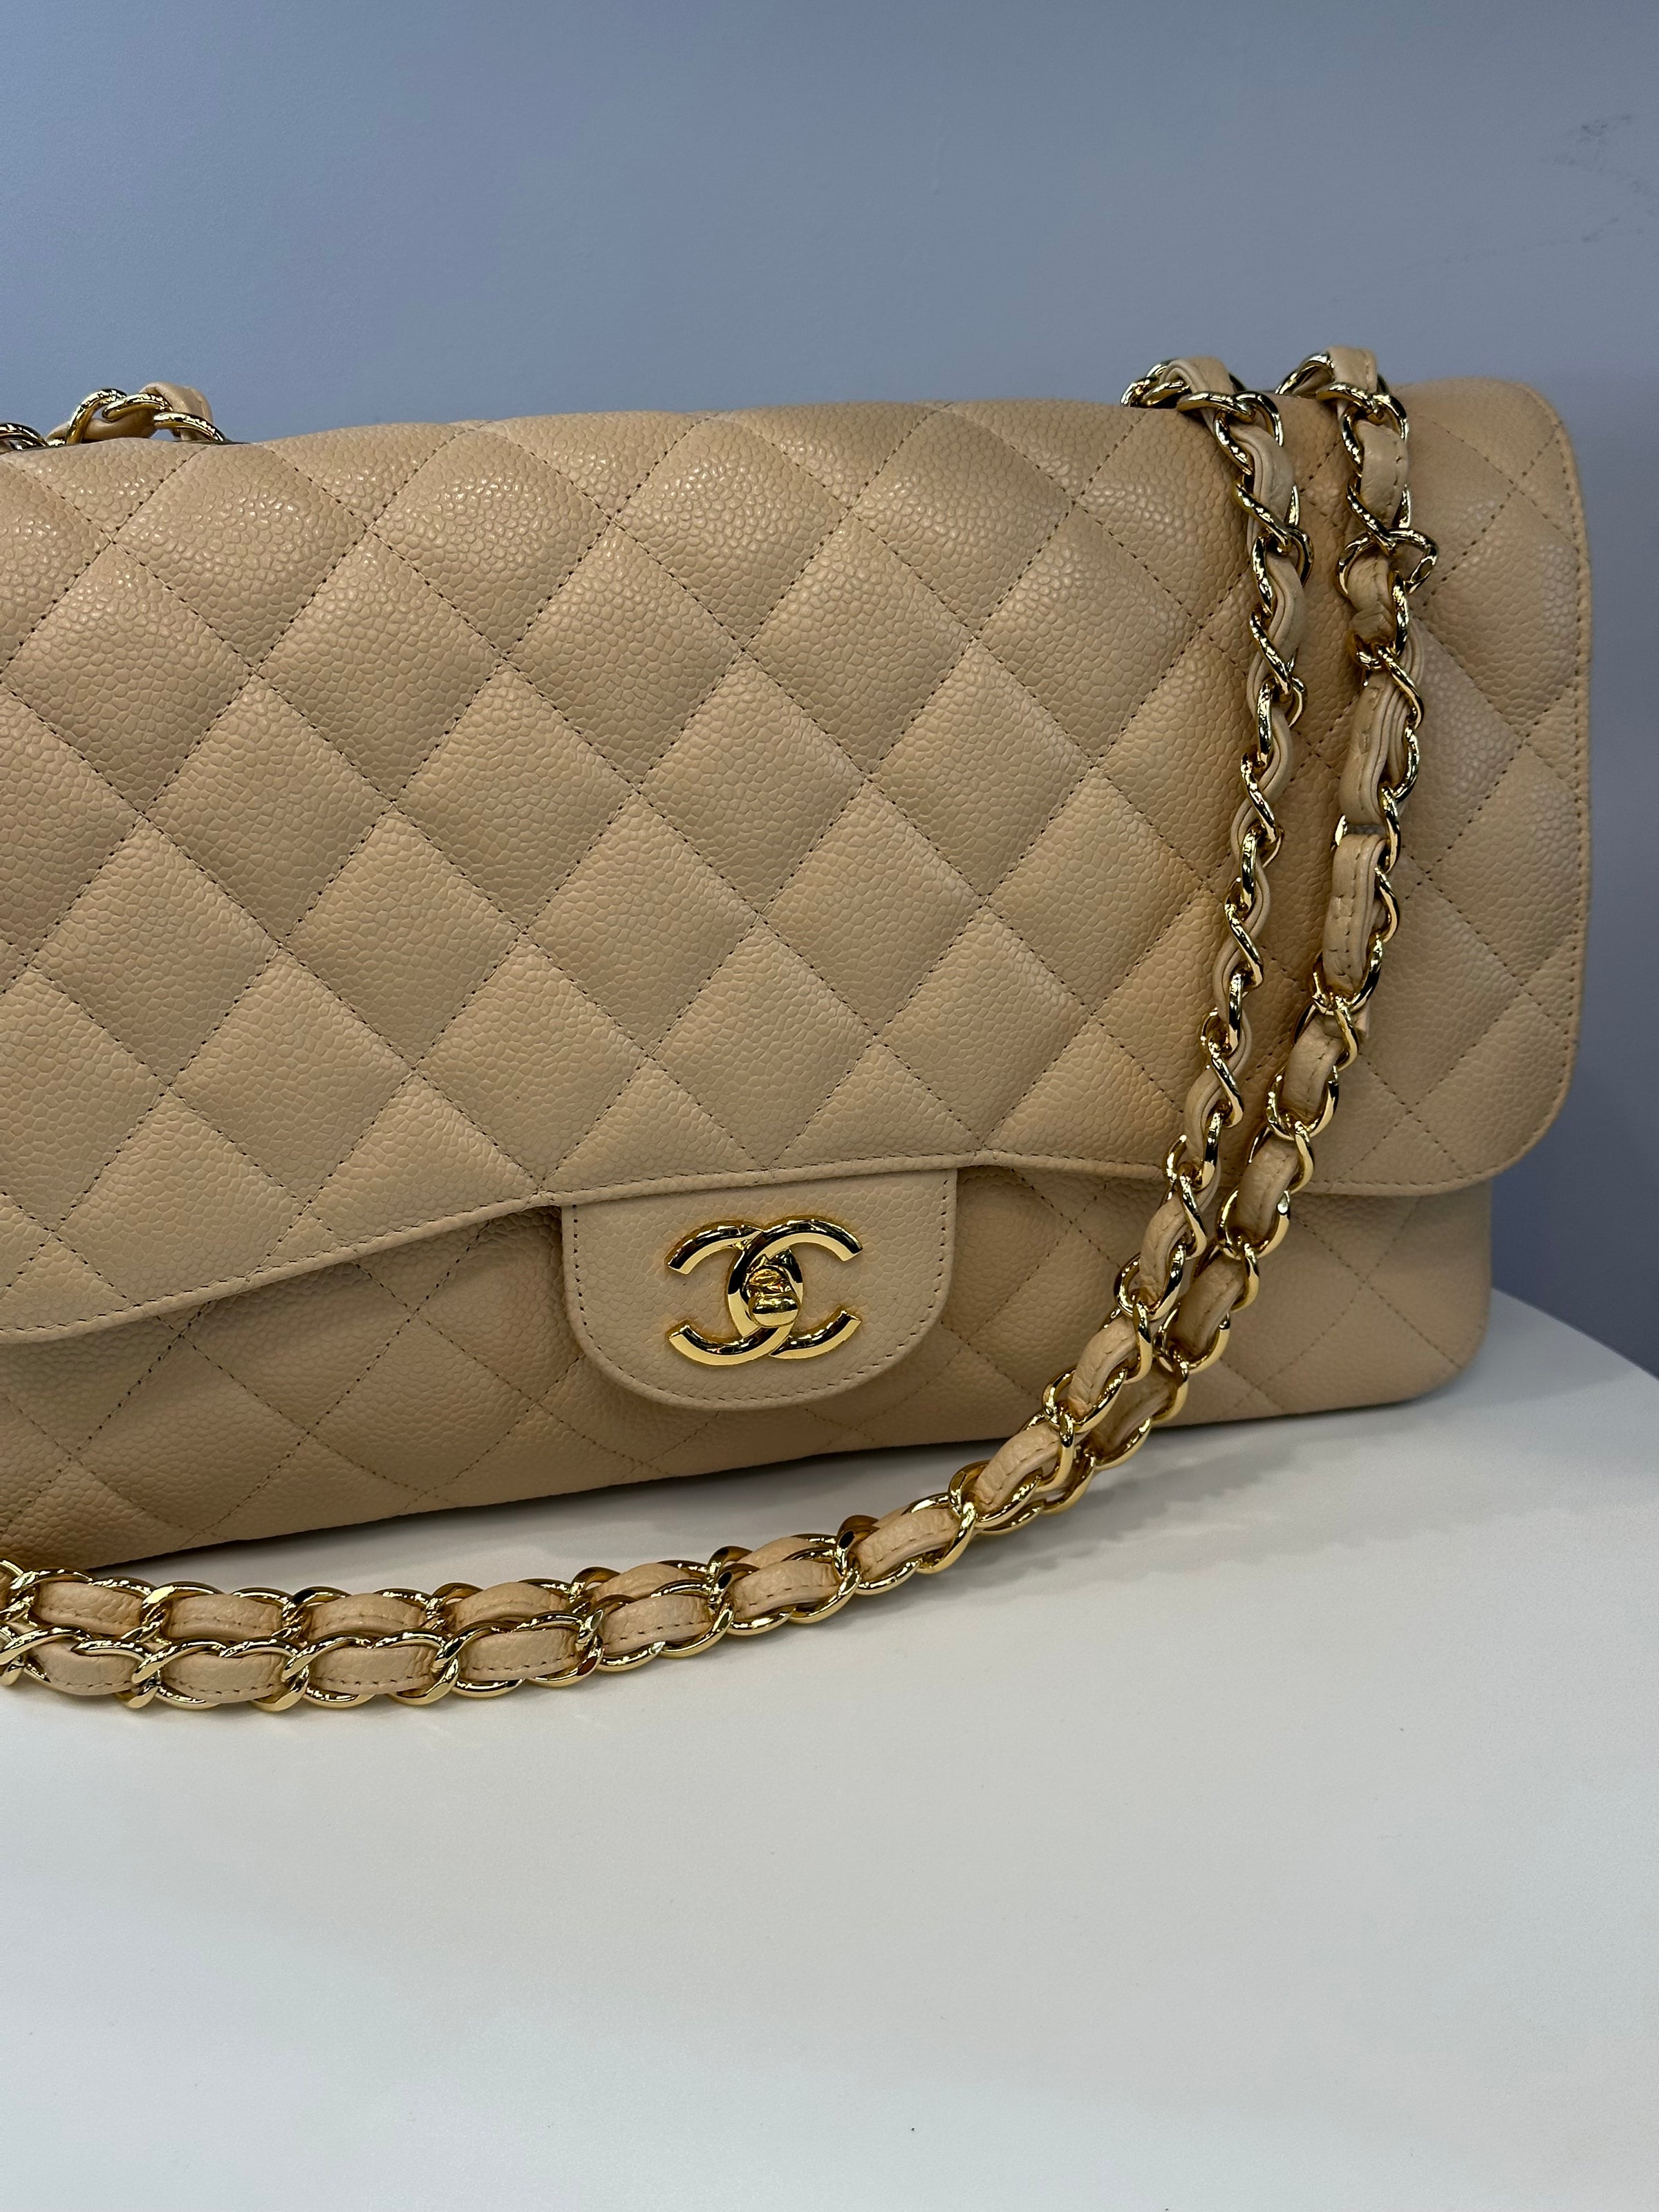 Chanel Pre-owned 2000 Jumbo Classic Flap Shoulder Bag - Brown